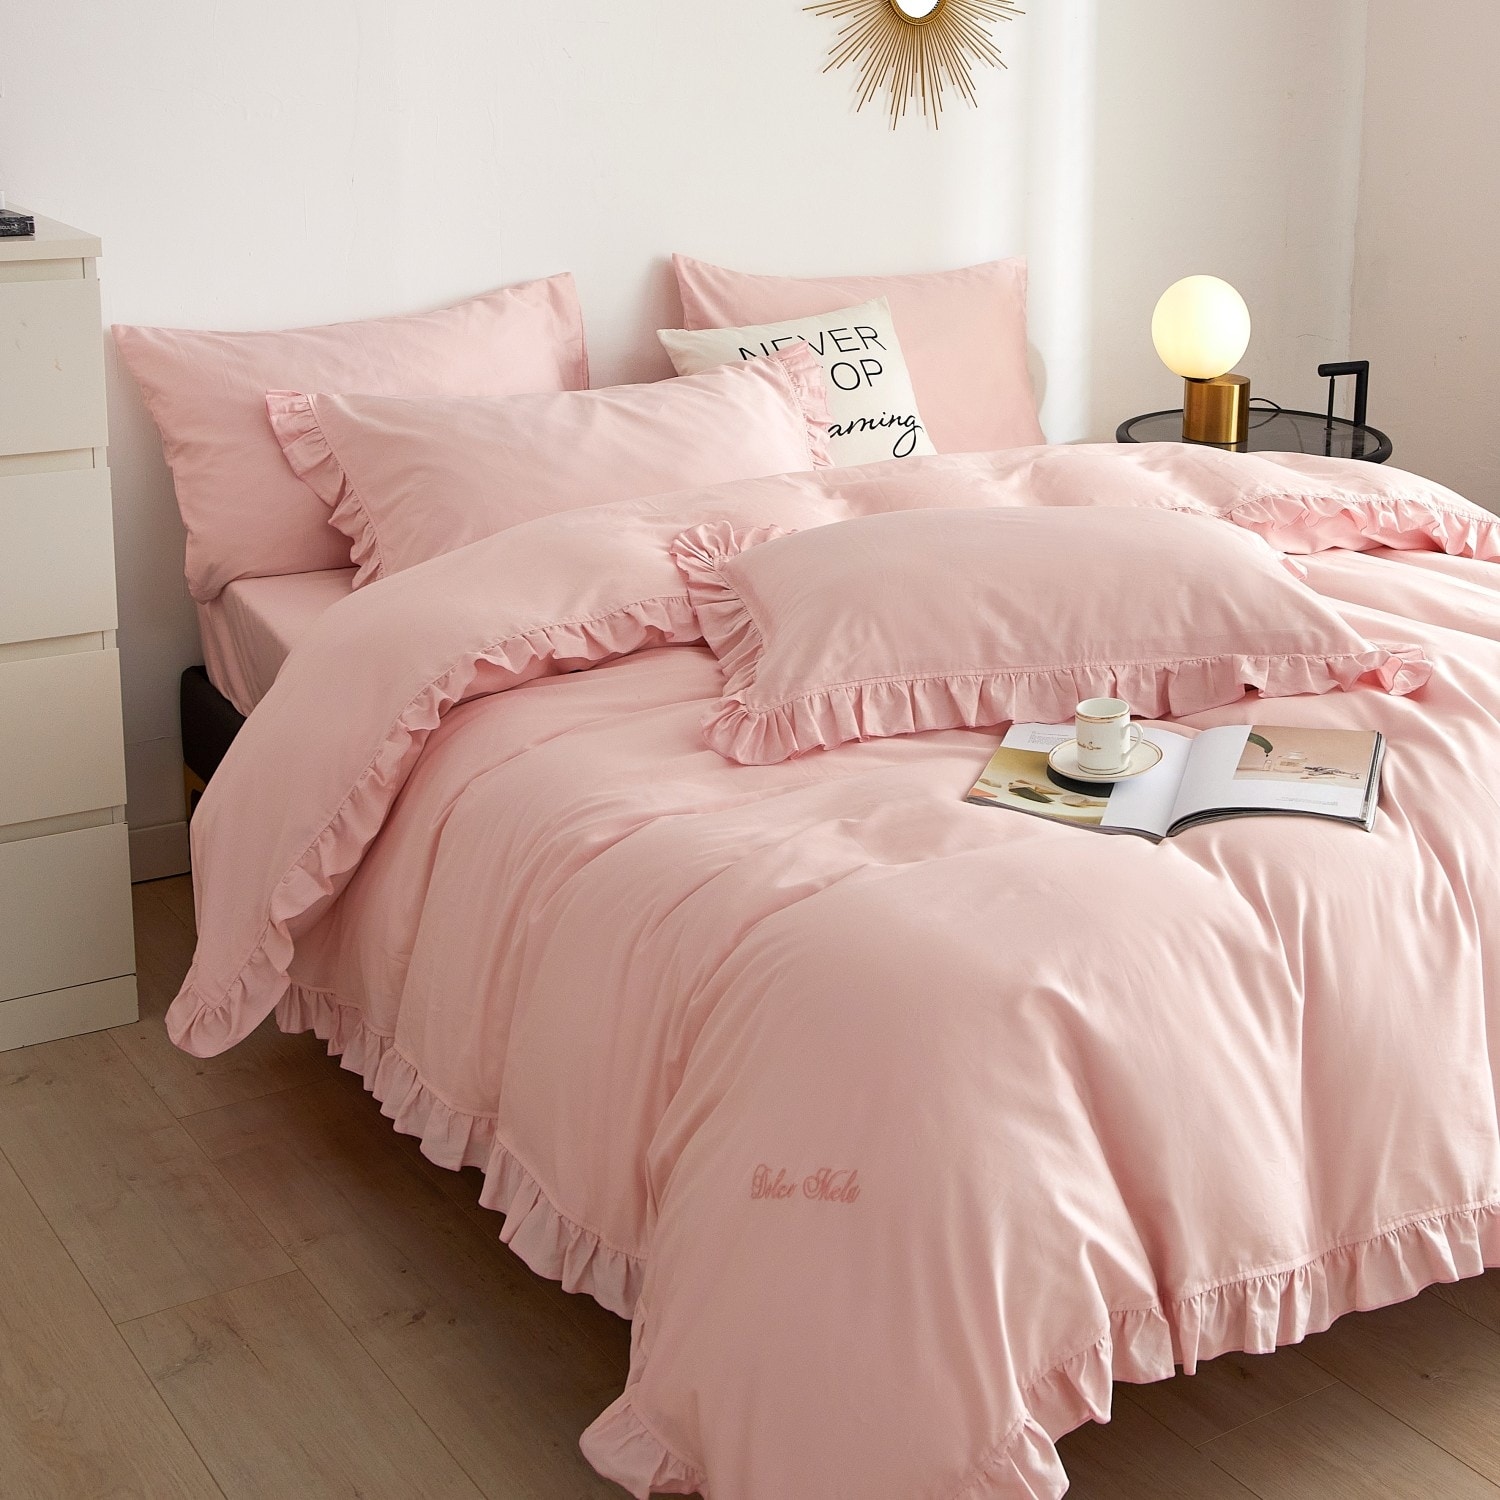 https://ak1.ostkcdn.com/images/products/is/images/direct/7981f9766526730ad5a3e00eade9dd6b1422fc90/Pink-Ruffle-Duvet-Cover%2C-Fitted-Bedding-Set%2C-100%25-Cotton.jpg